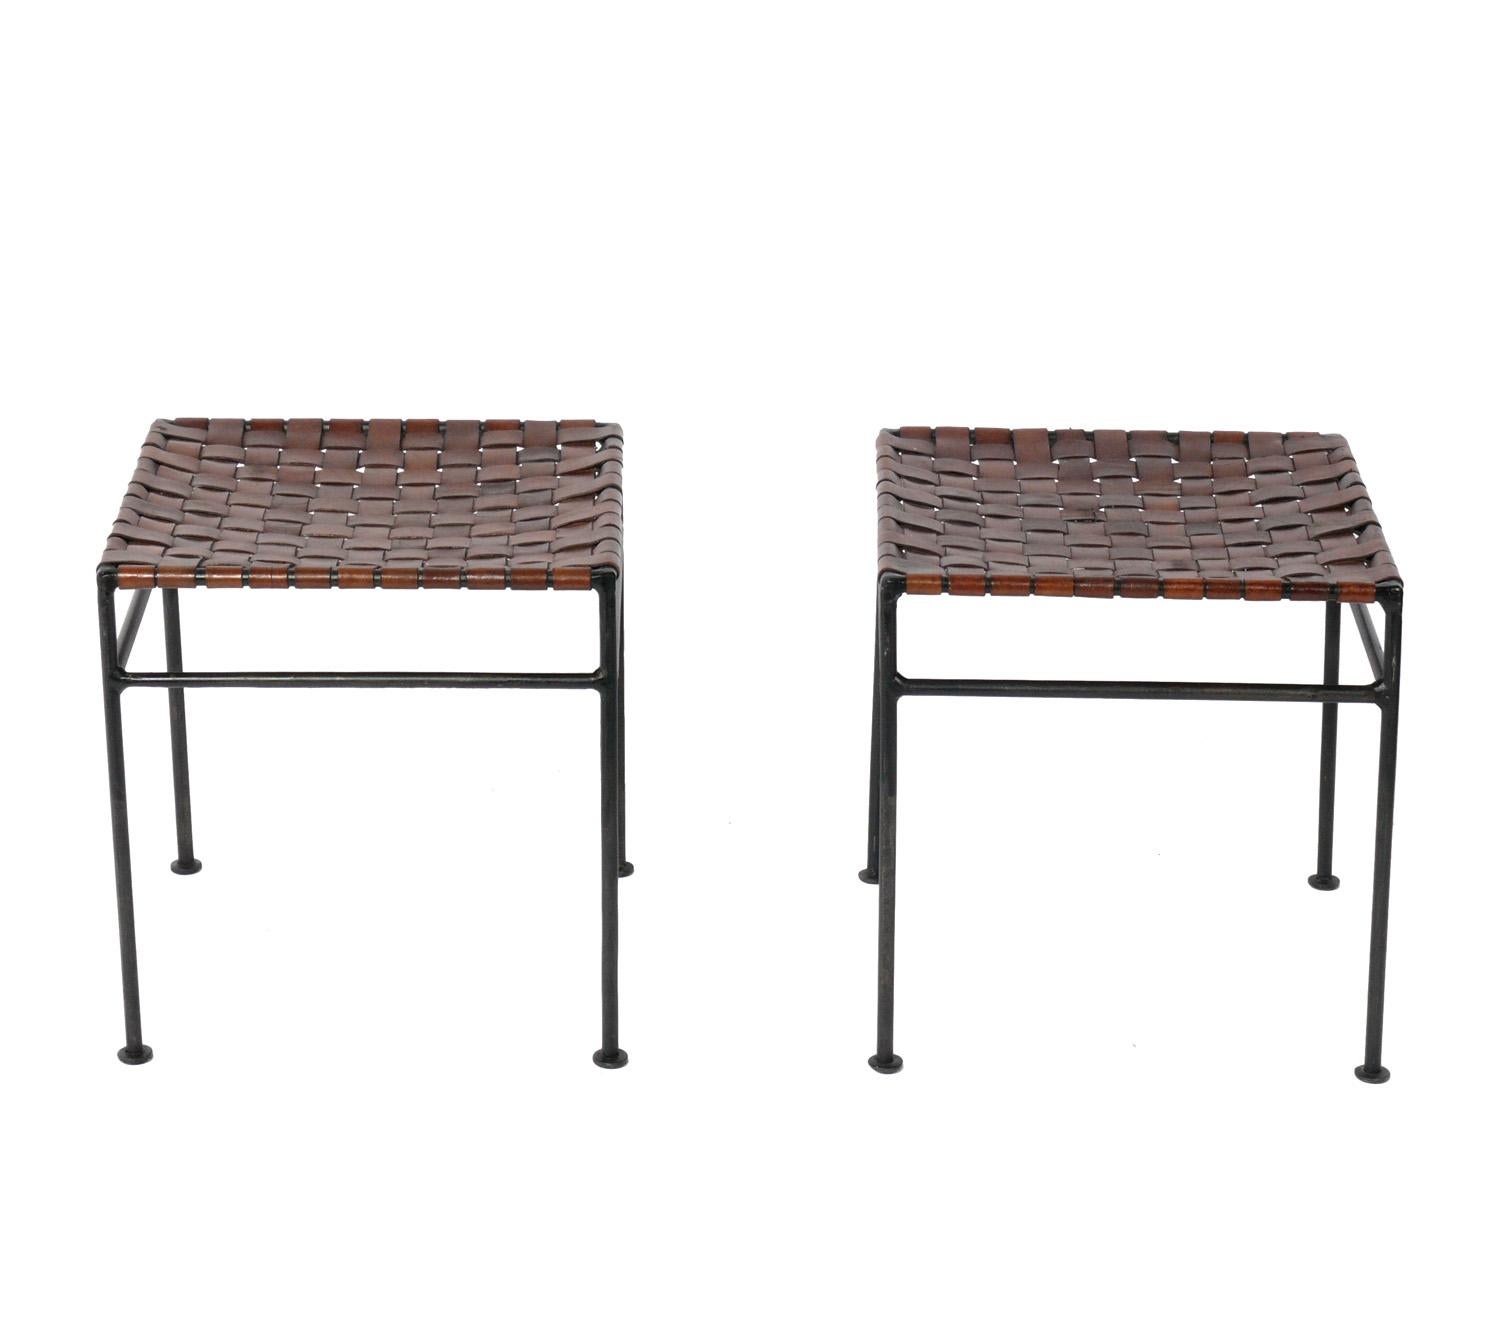 Iron and woven leather strap stools, in the manner of Lila Swift and Donald Monell, American, circa 1980s. They retain their warm original patina.